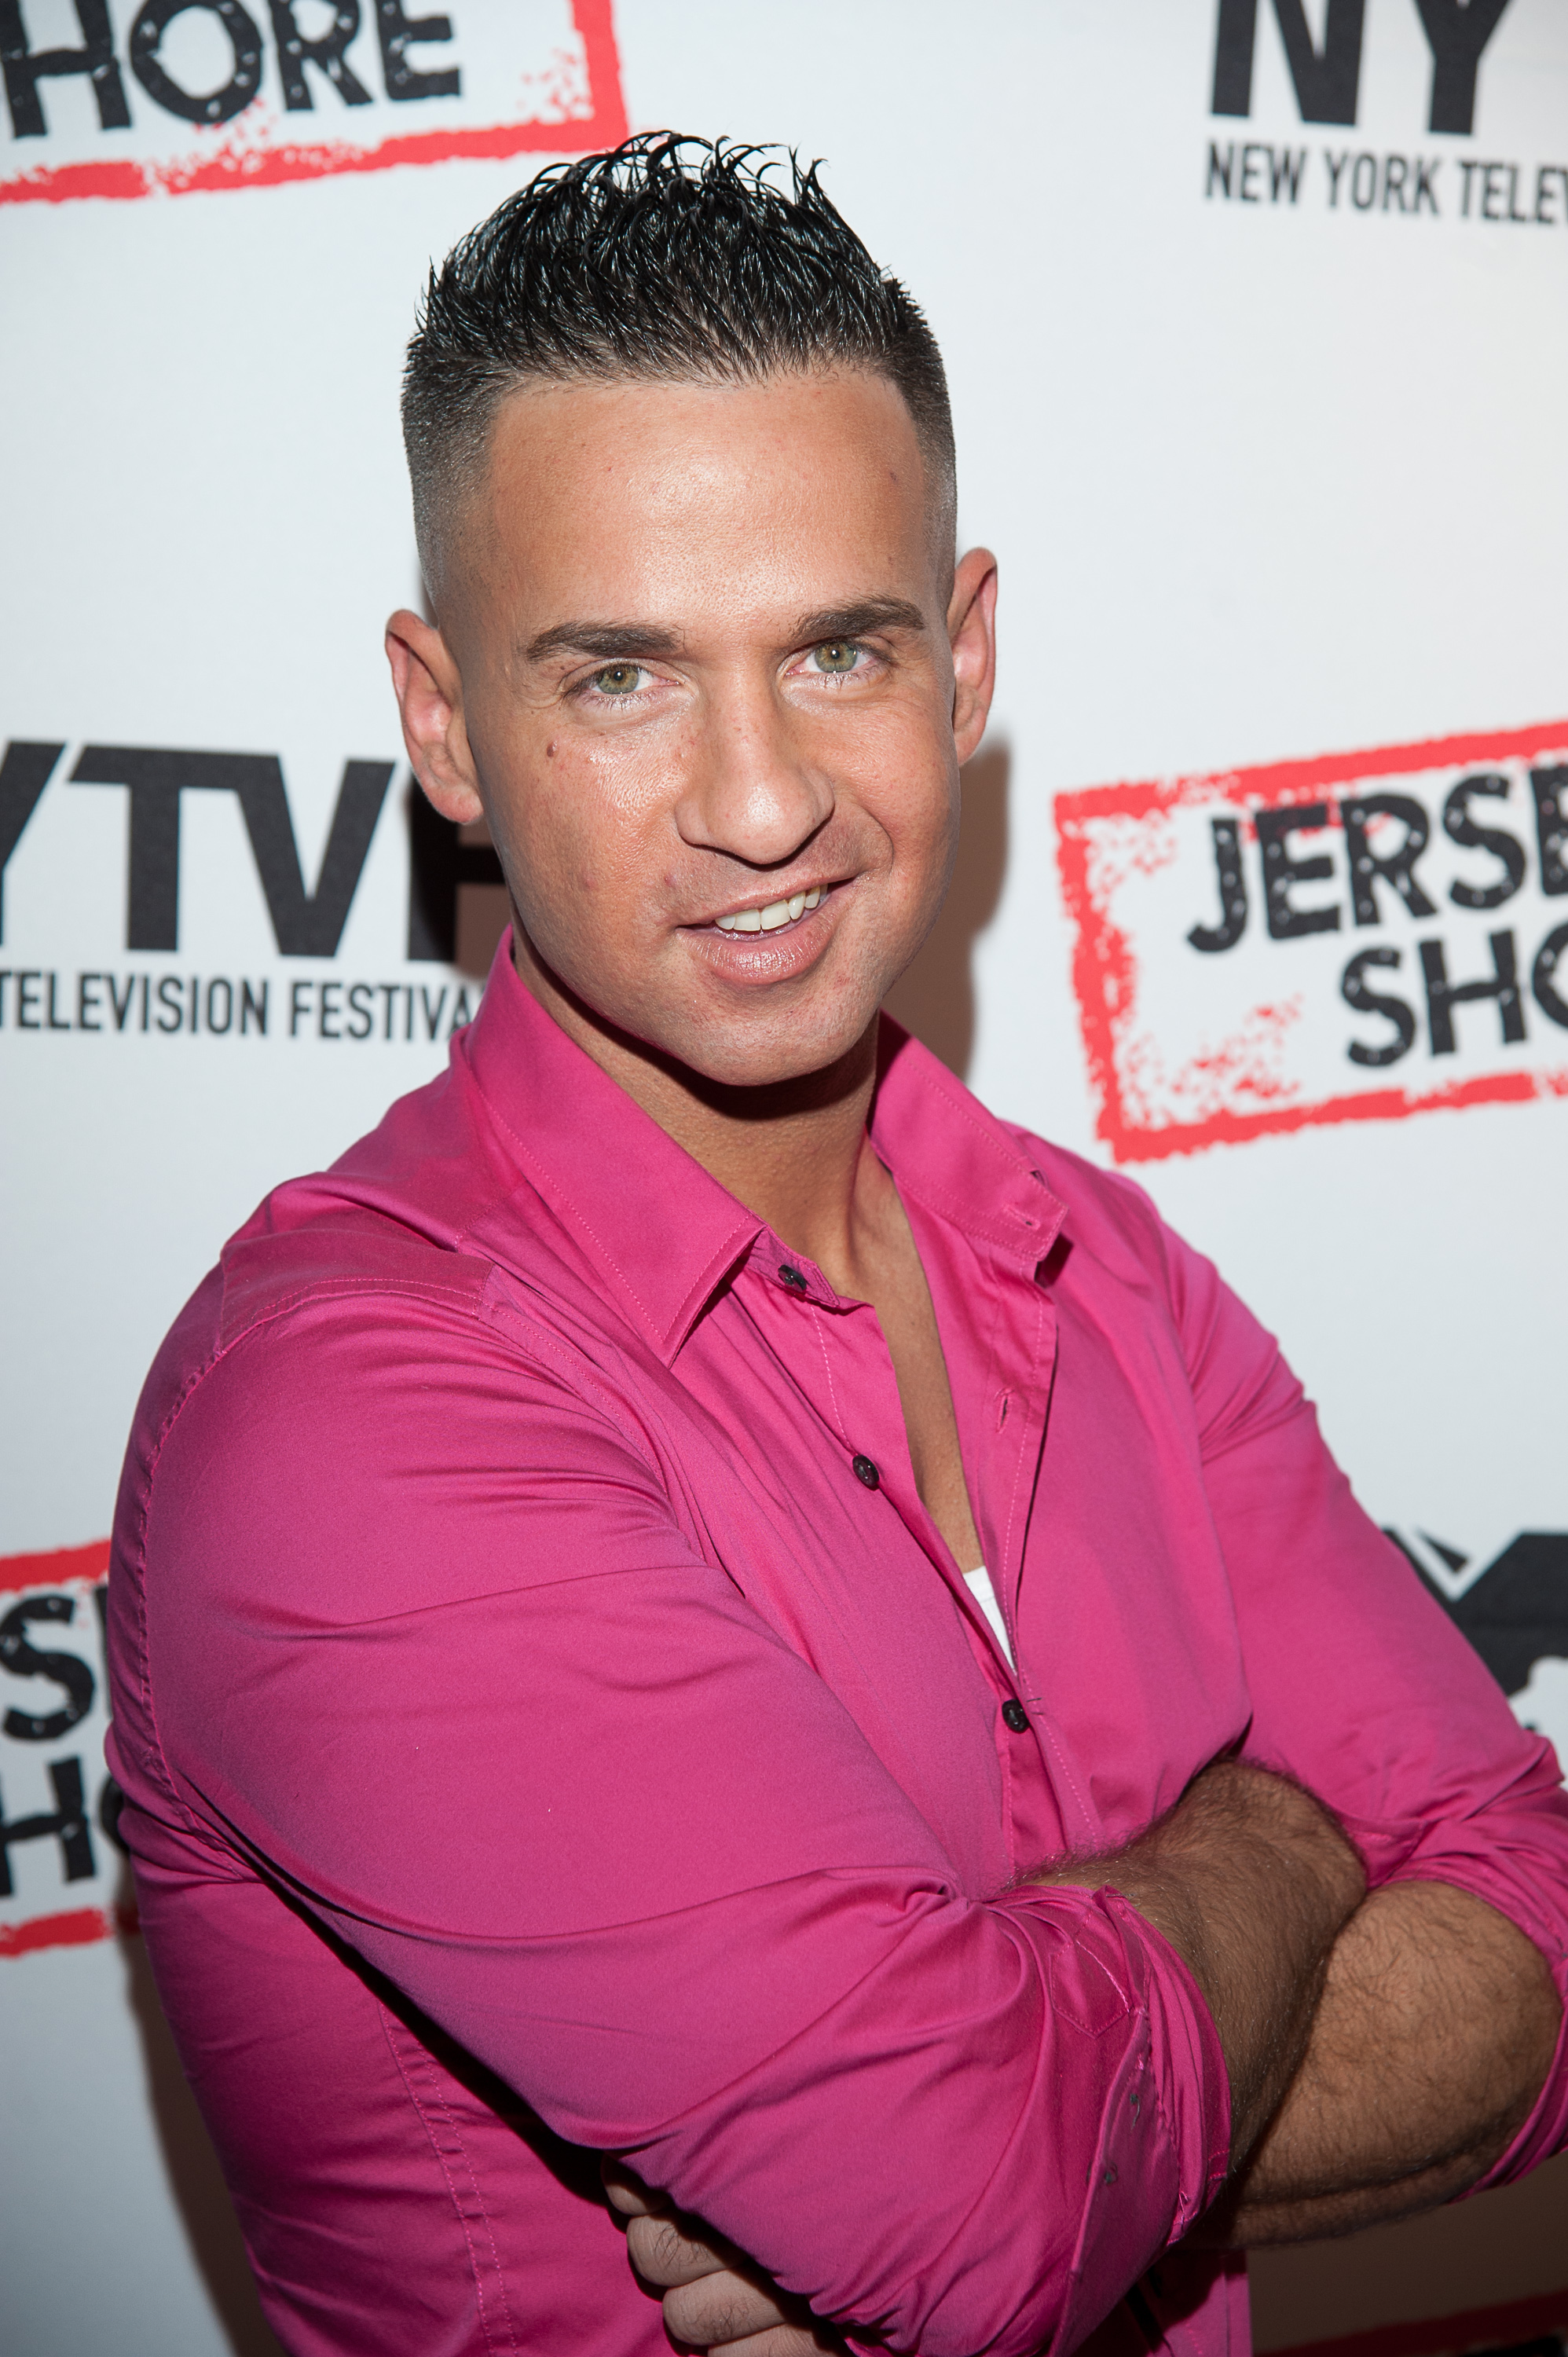 Jersey Shore: Mike ¿The Situation¿ Sorrentino faces up to 